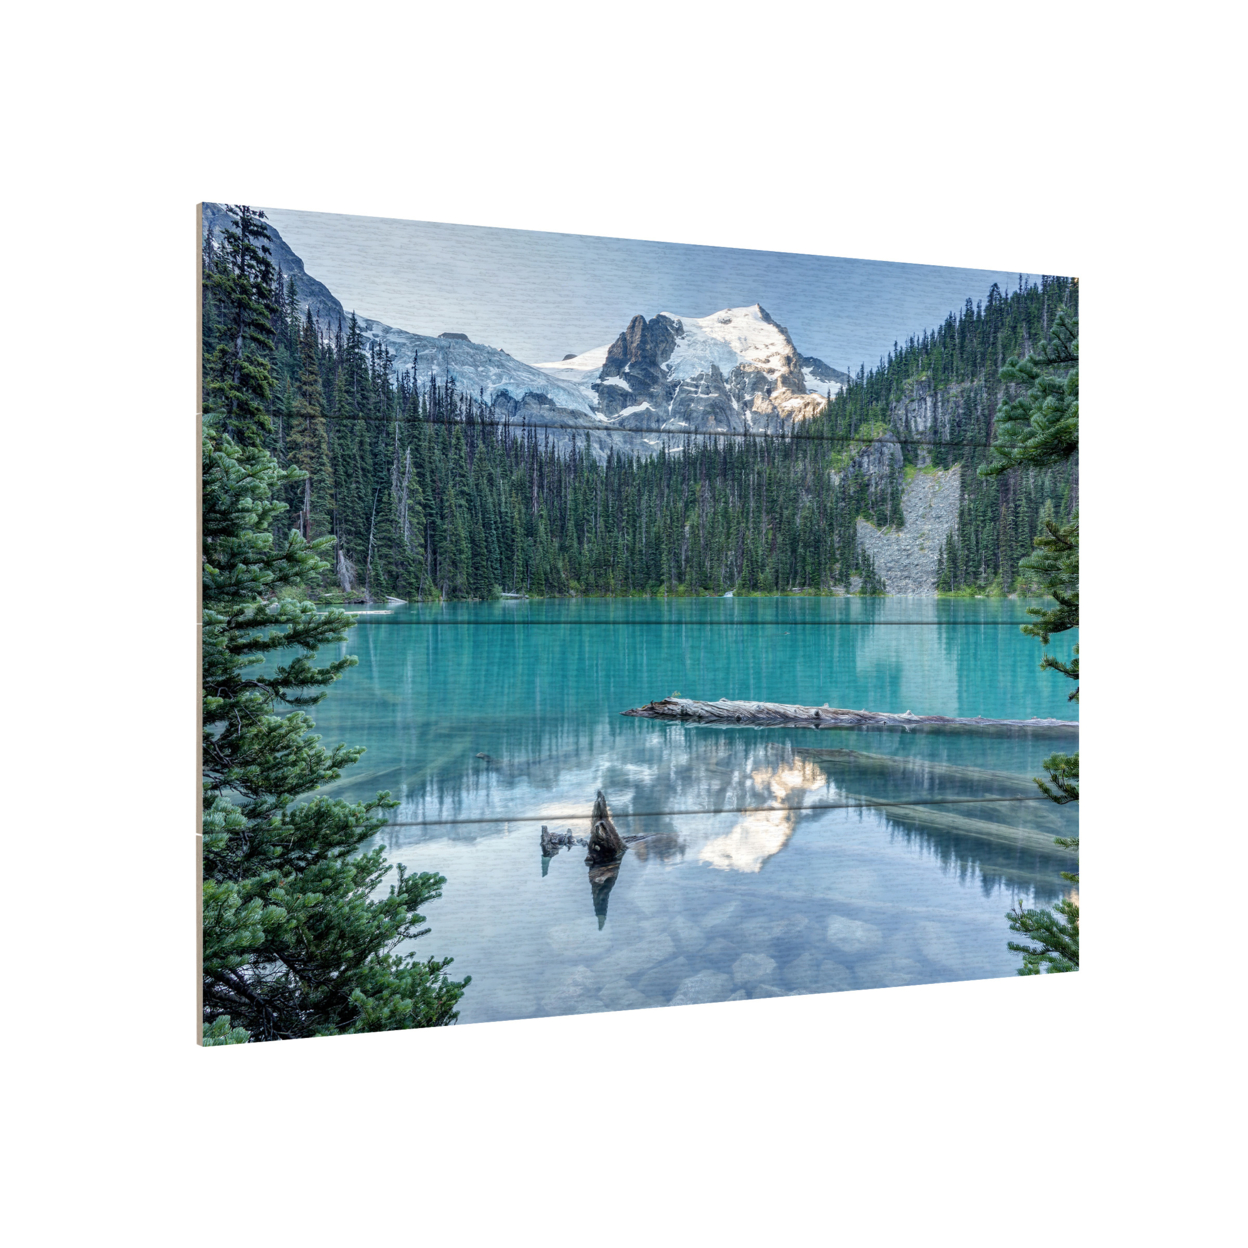 Wall Art 12 X 16 Inches Titled Natural Beautiful British Columbia Ready To Hang Printed On Wooden Planks